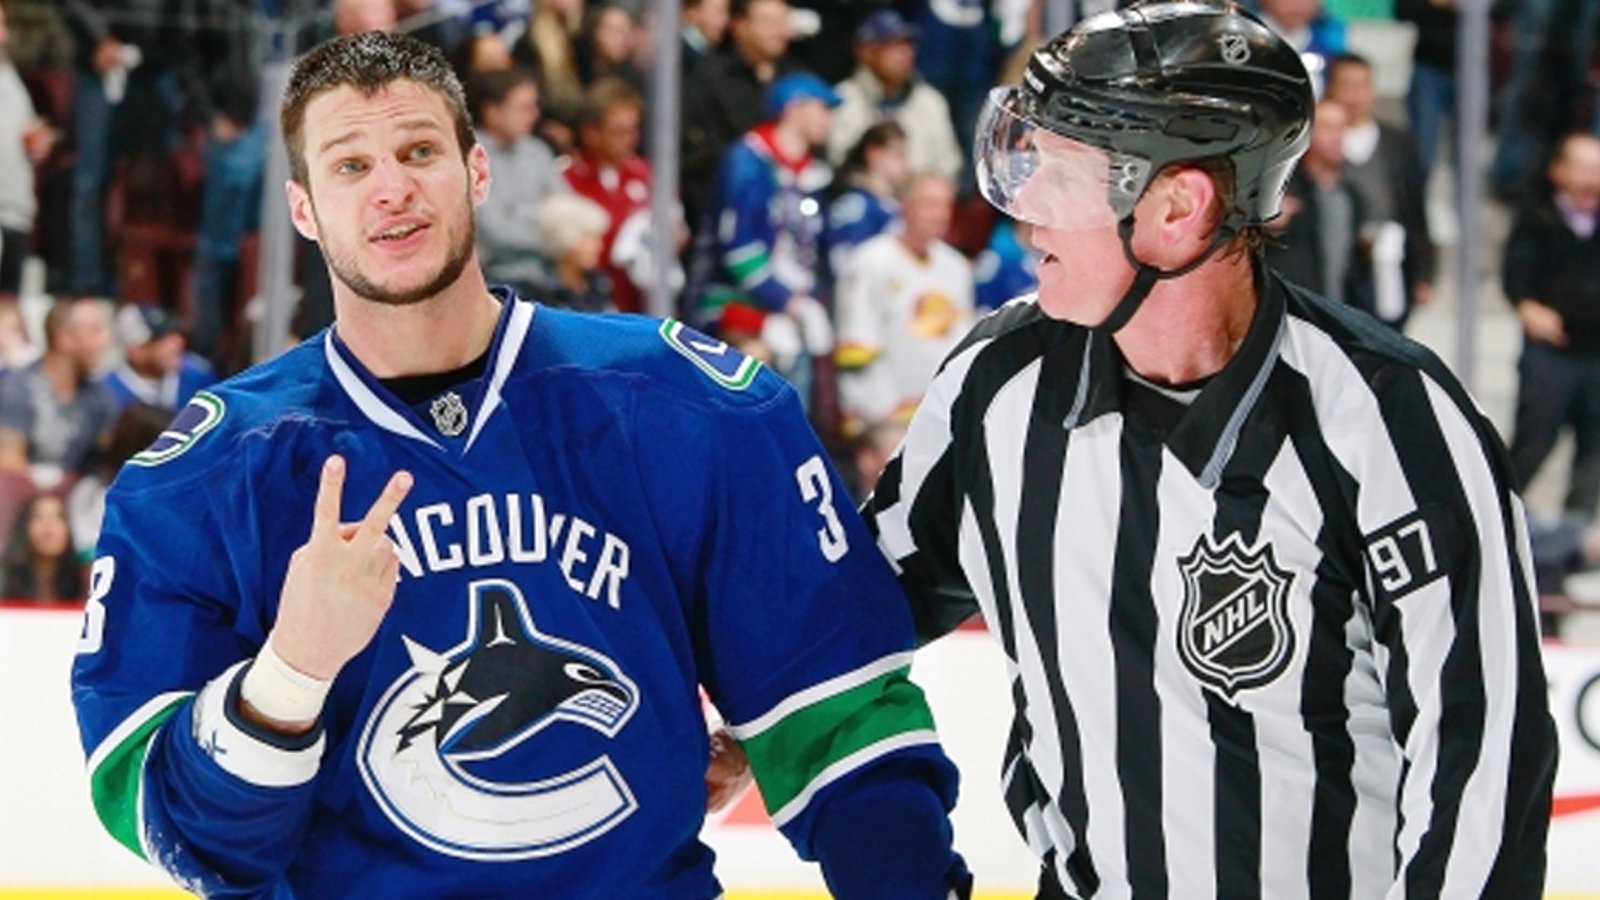 Bieksa: “Half the guys that I have talked to don’t even want to play”